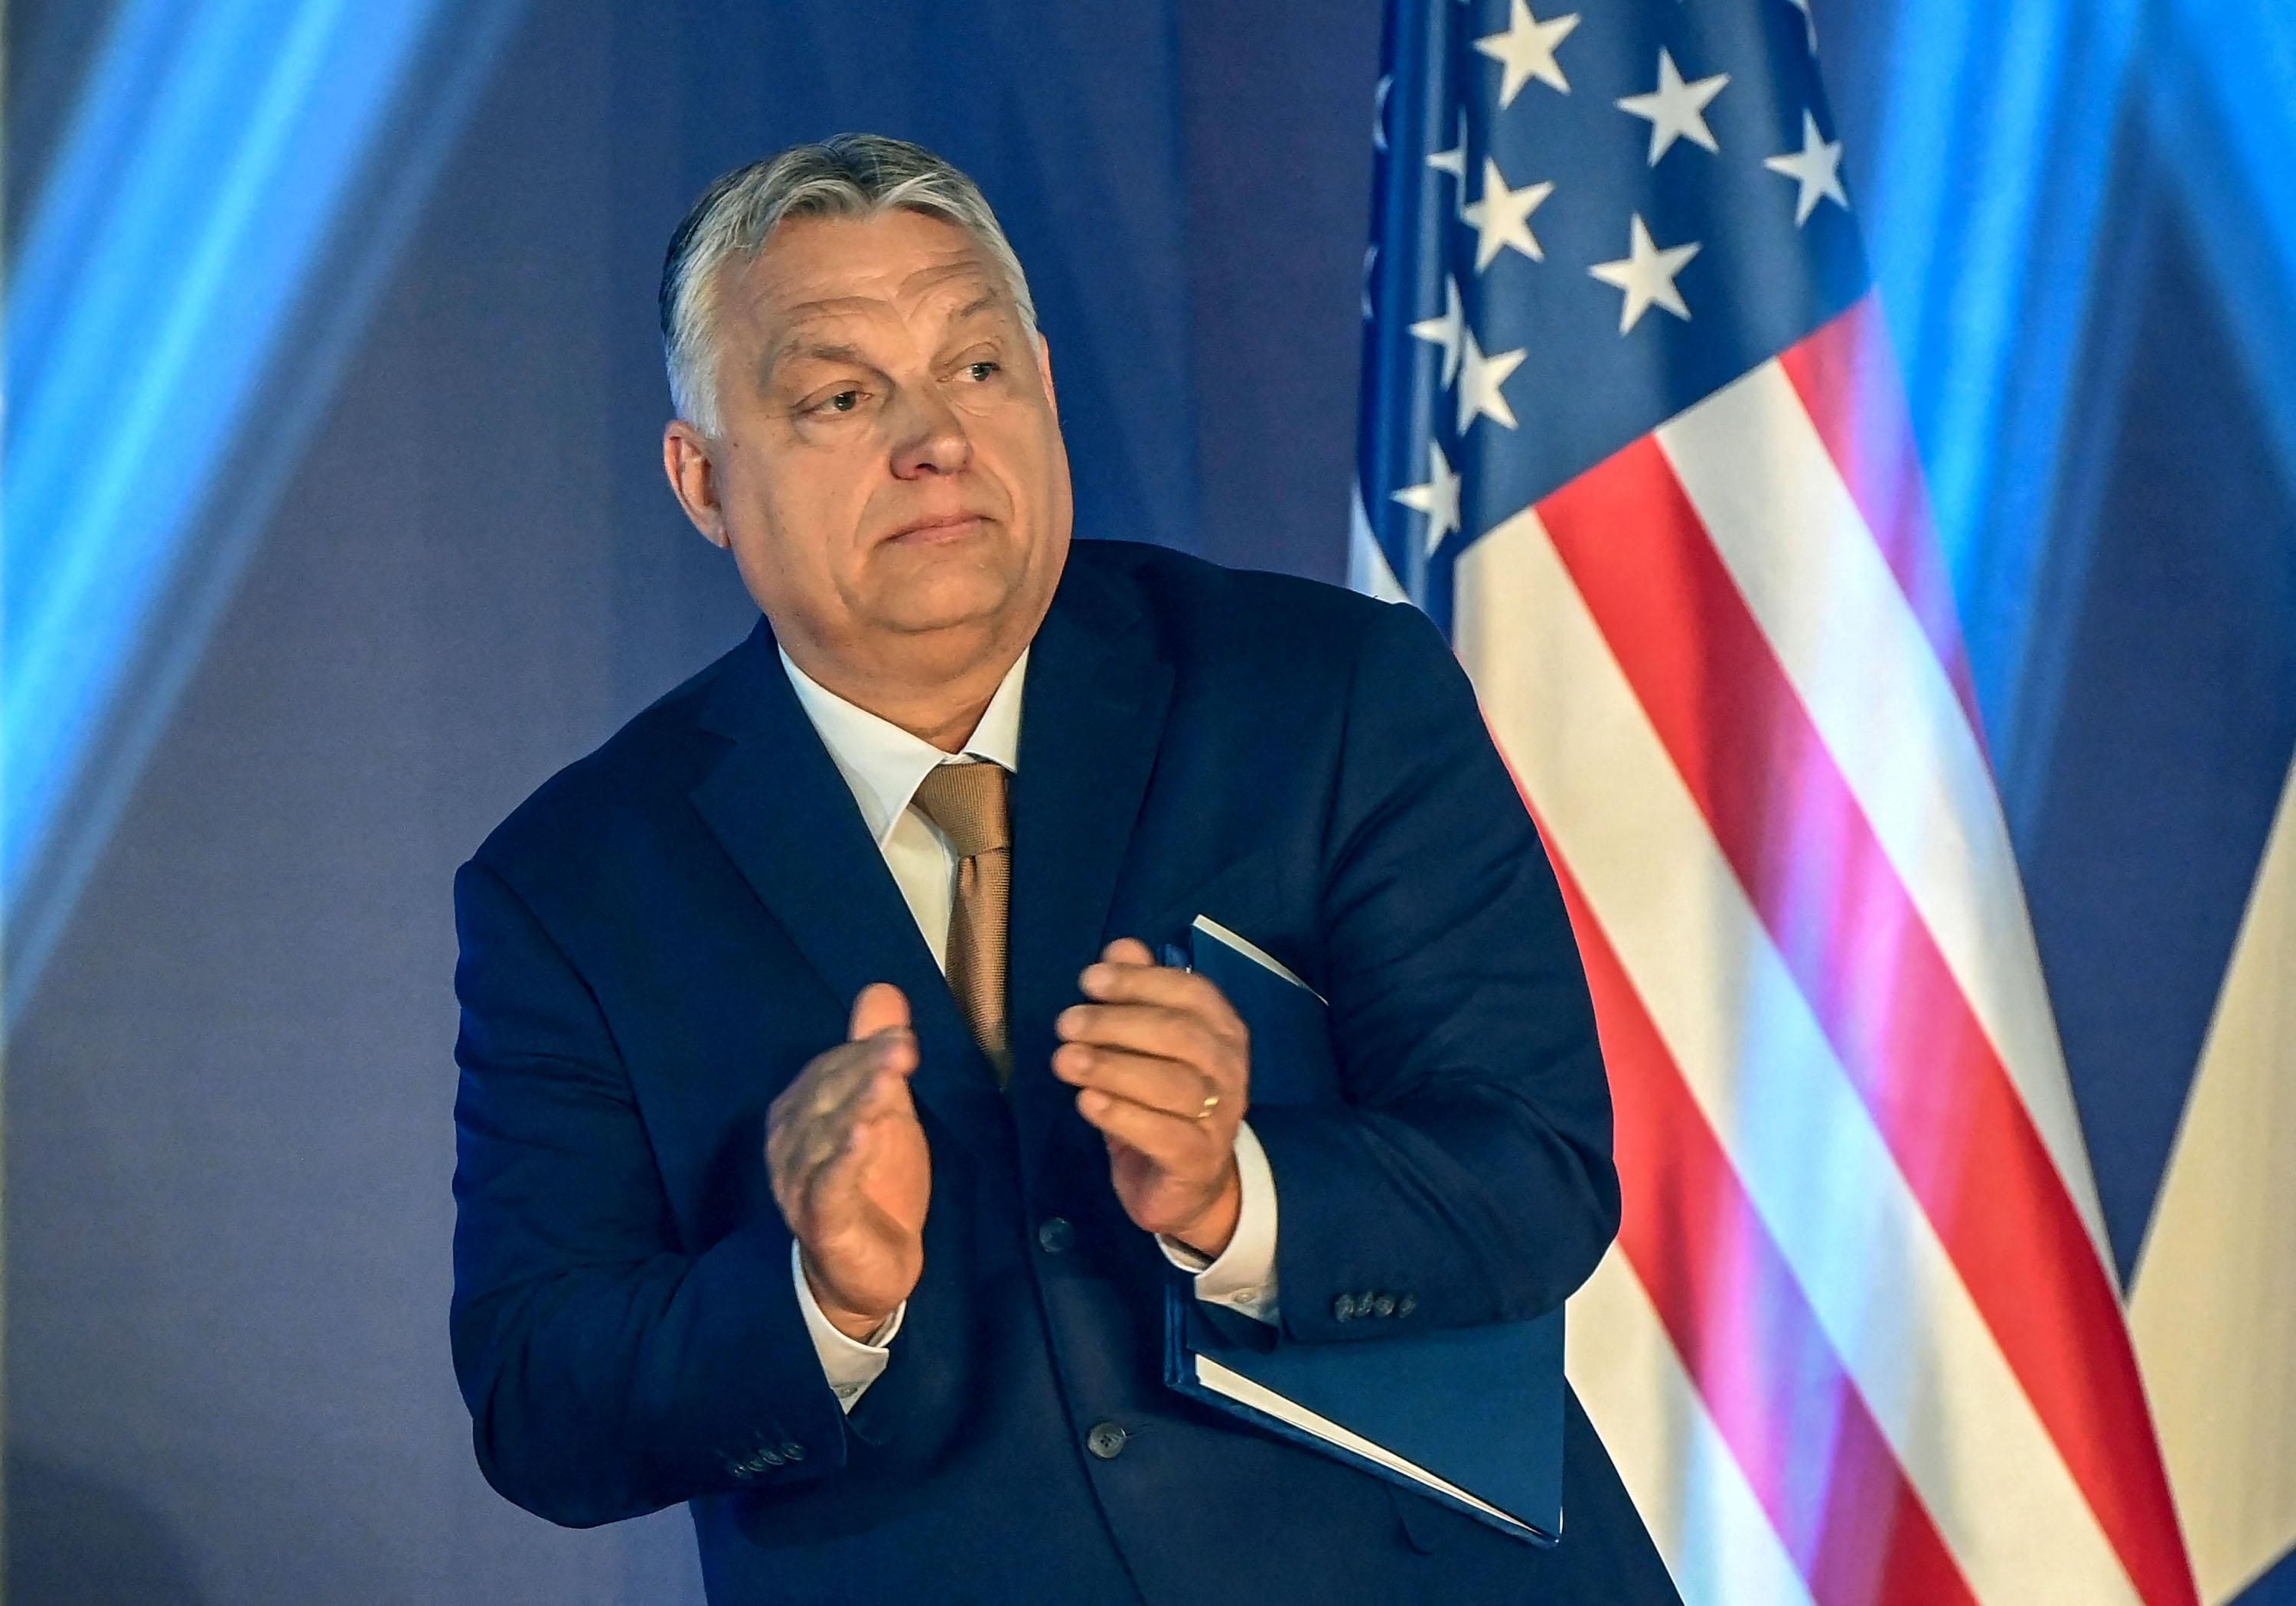 Hungarian Prime Minister Viktor Orban stands in front of a US flag after addressing a keynote speech during an extraordinary session of the Conservative Political Action Conference (CPAC) at the Balna cultural centre of Budapest, Hungary on May 19, 2022. - The two-day CPAC meeting is being held in Europe for the first time. (Photo by ATTILA KISBENEDEK/AFP via Getty Images)